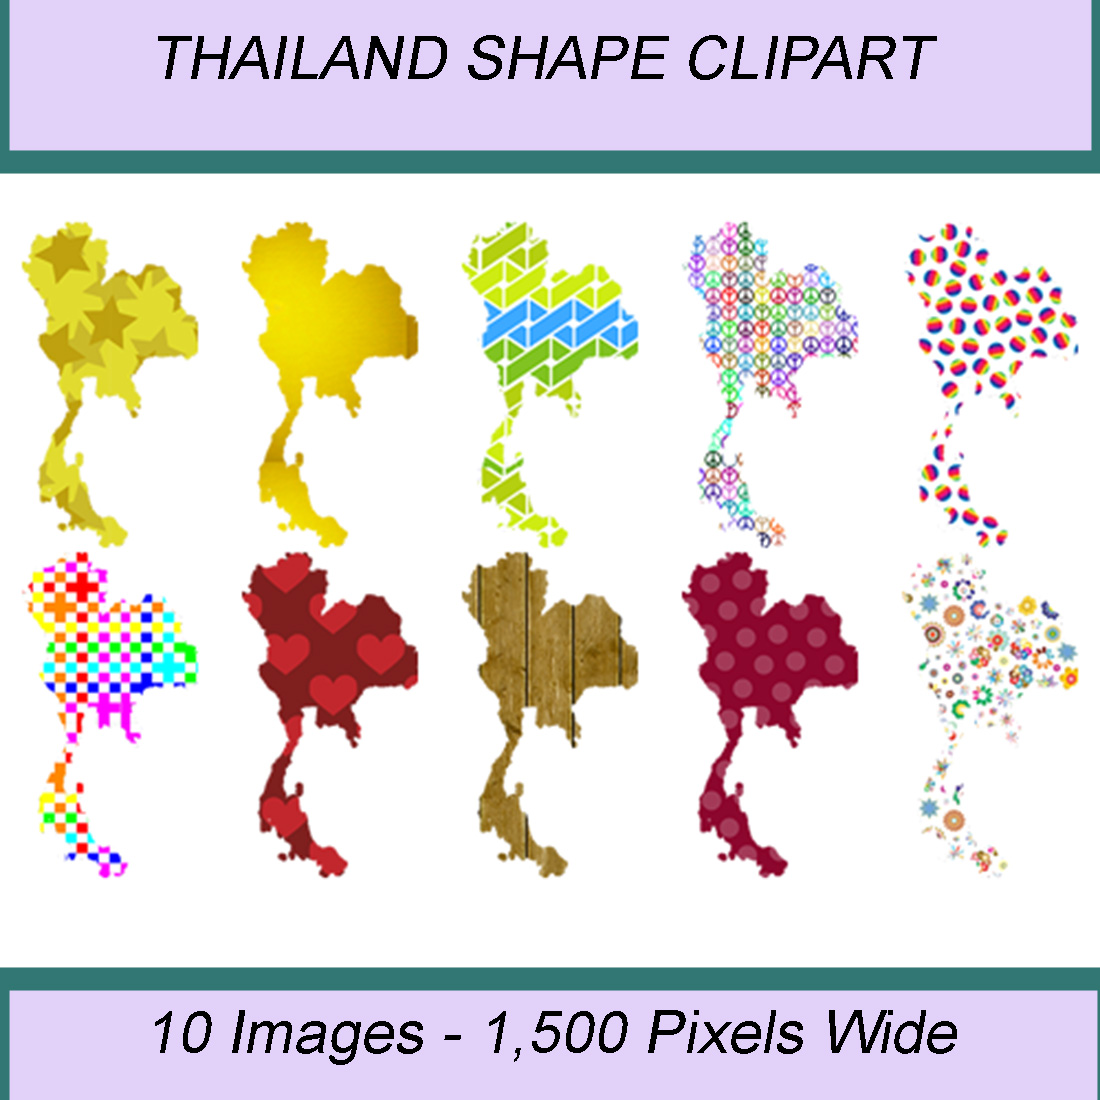 THAILAND SHAPE CLIPART ICONS cover image.